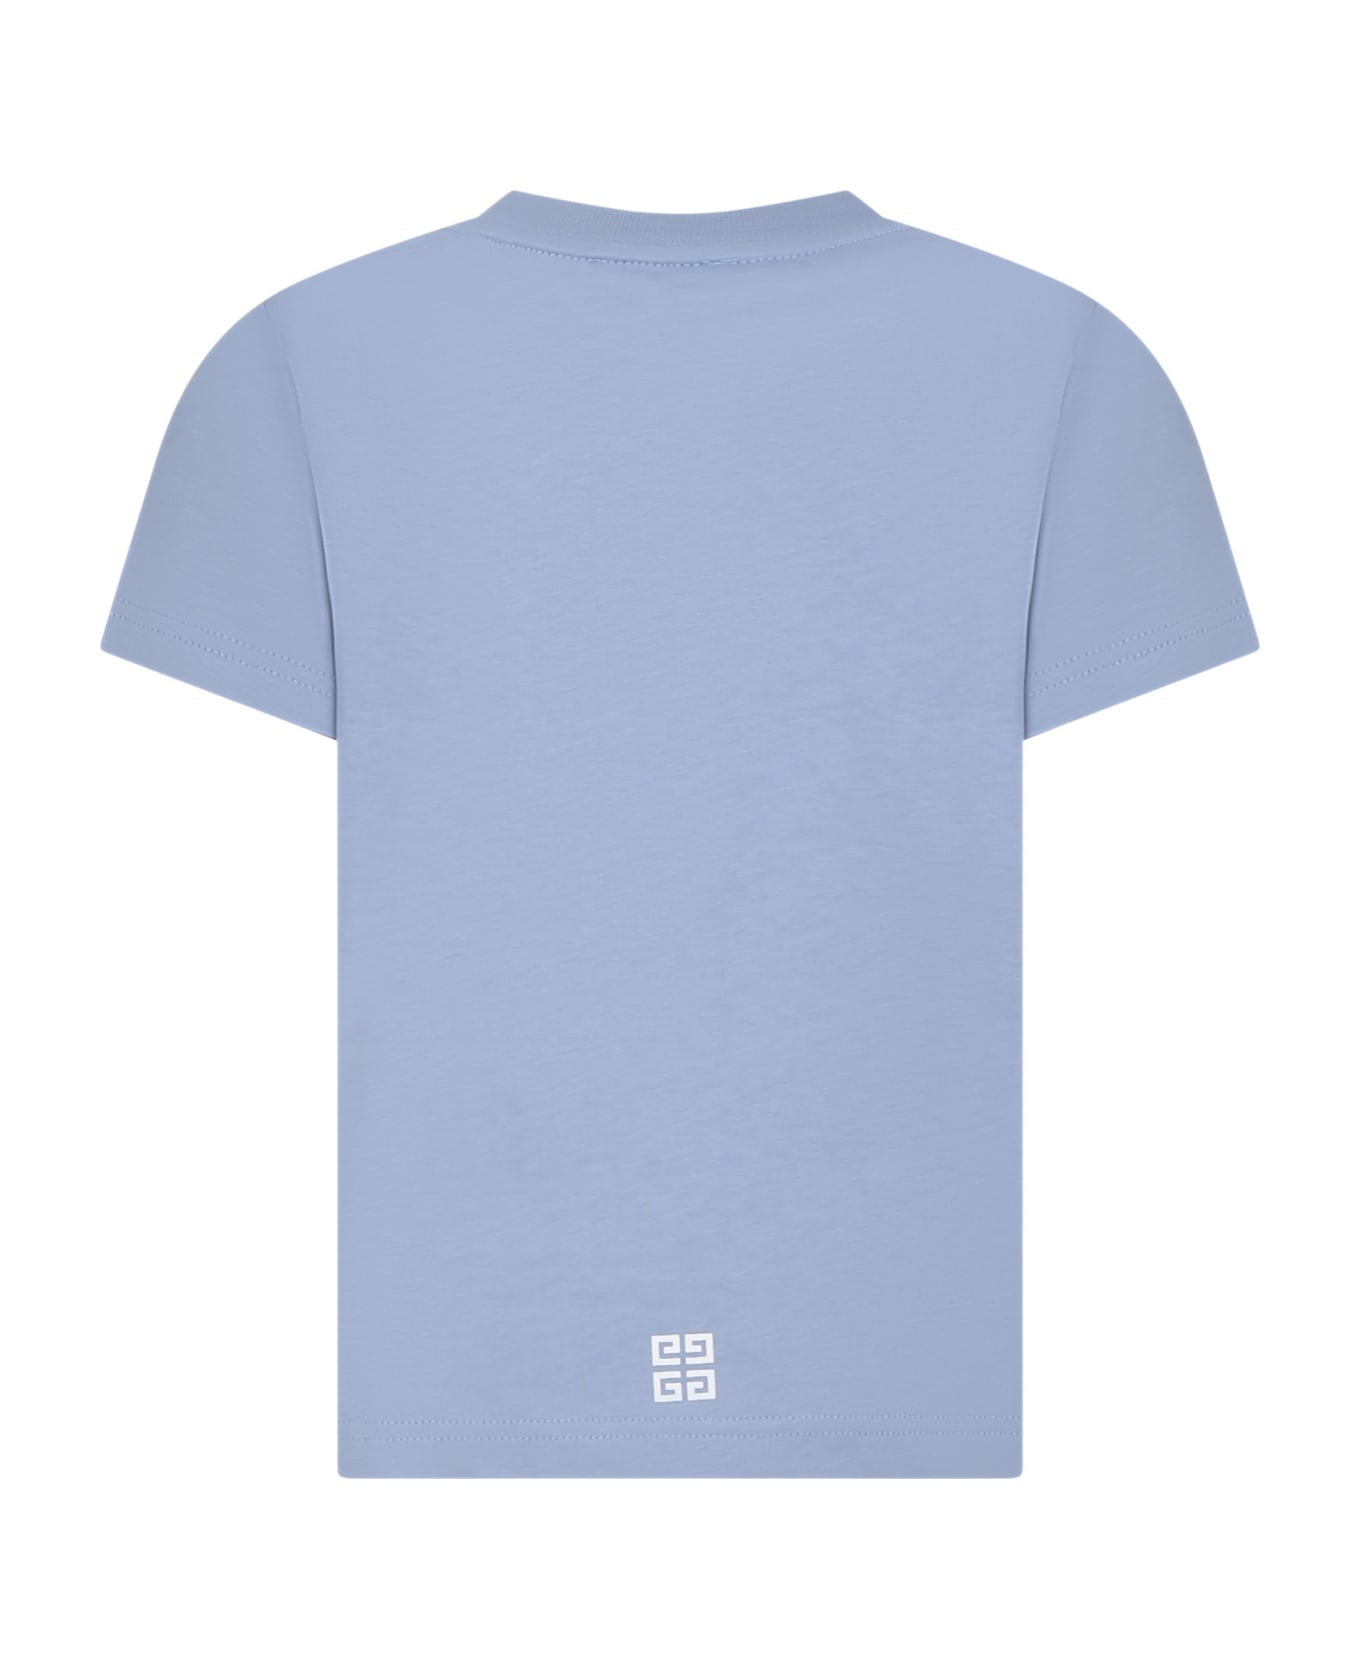 Givenchy Light Blue T-shirt For Boy With Logo - Azzurro